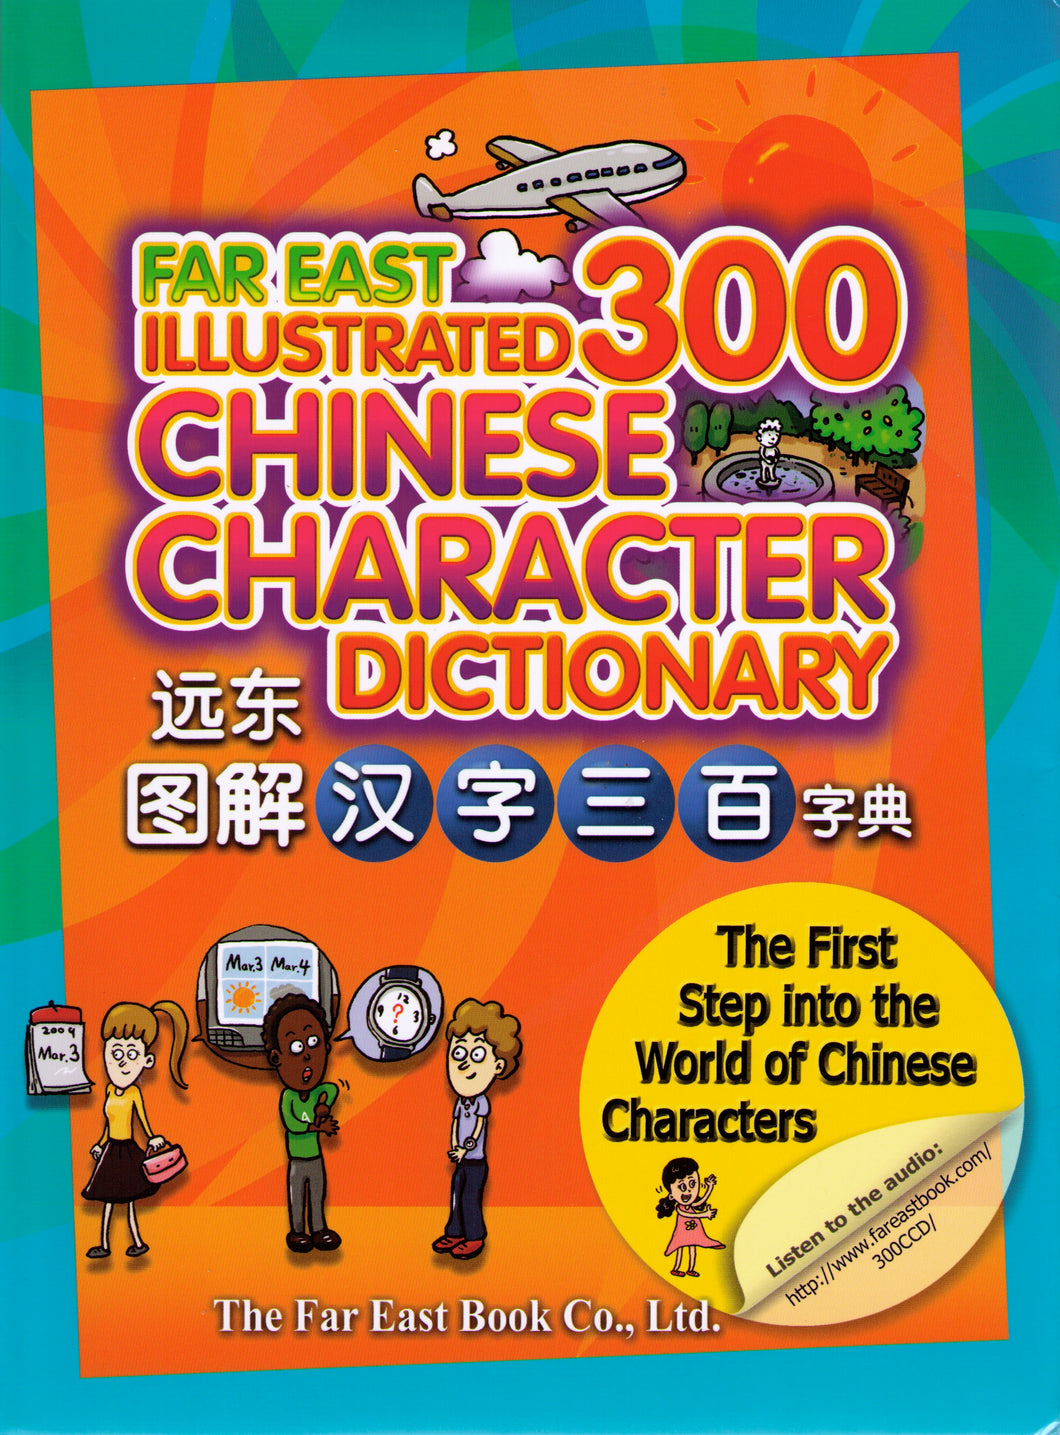 Far East Illustrated 300 Chinese Character Dictionary遠東圖解漢字三百字典